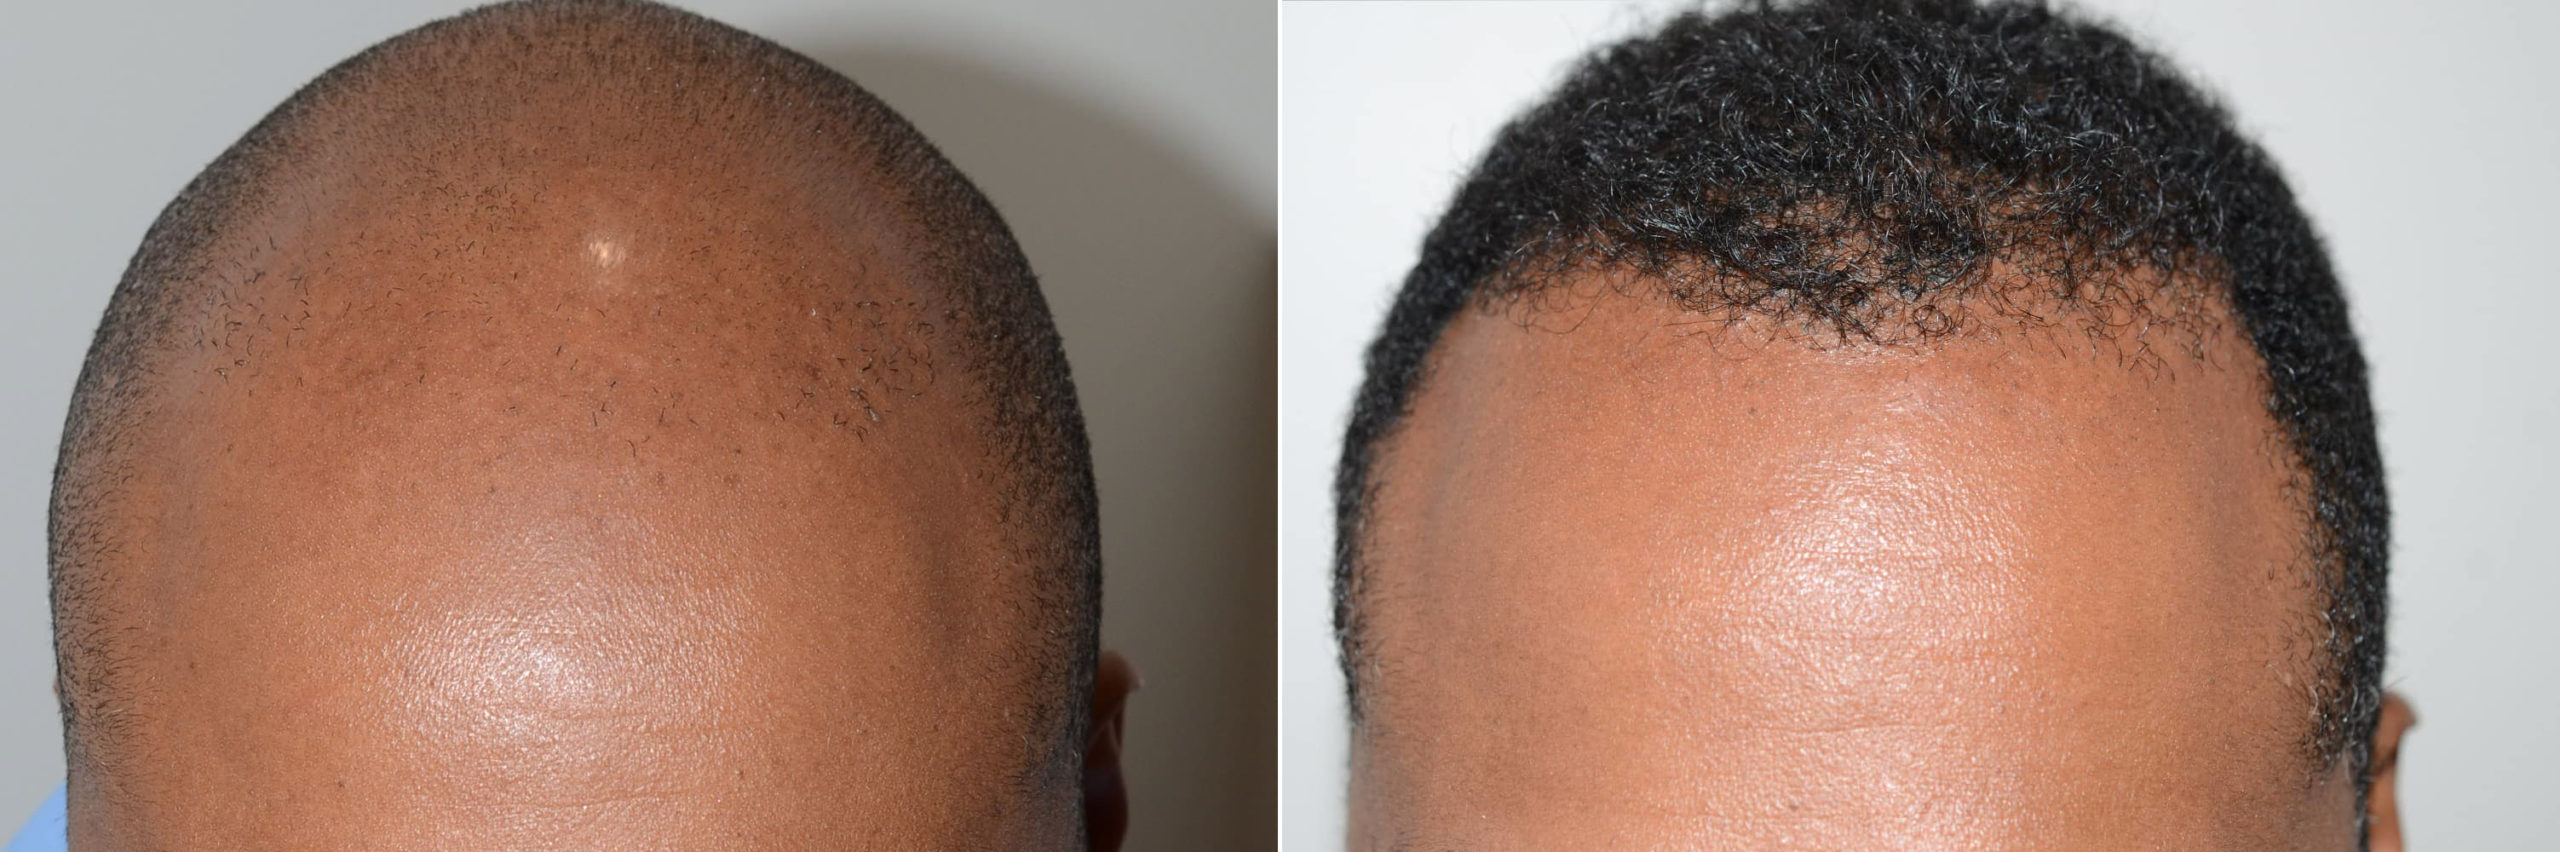 Before and After - Frontal View (Close up)